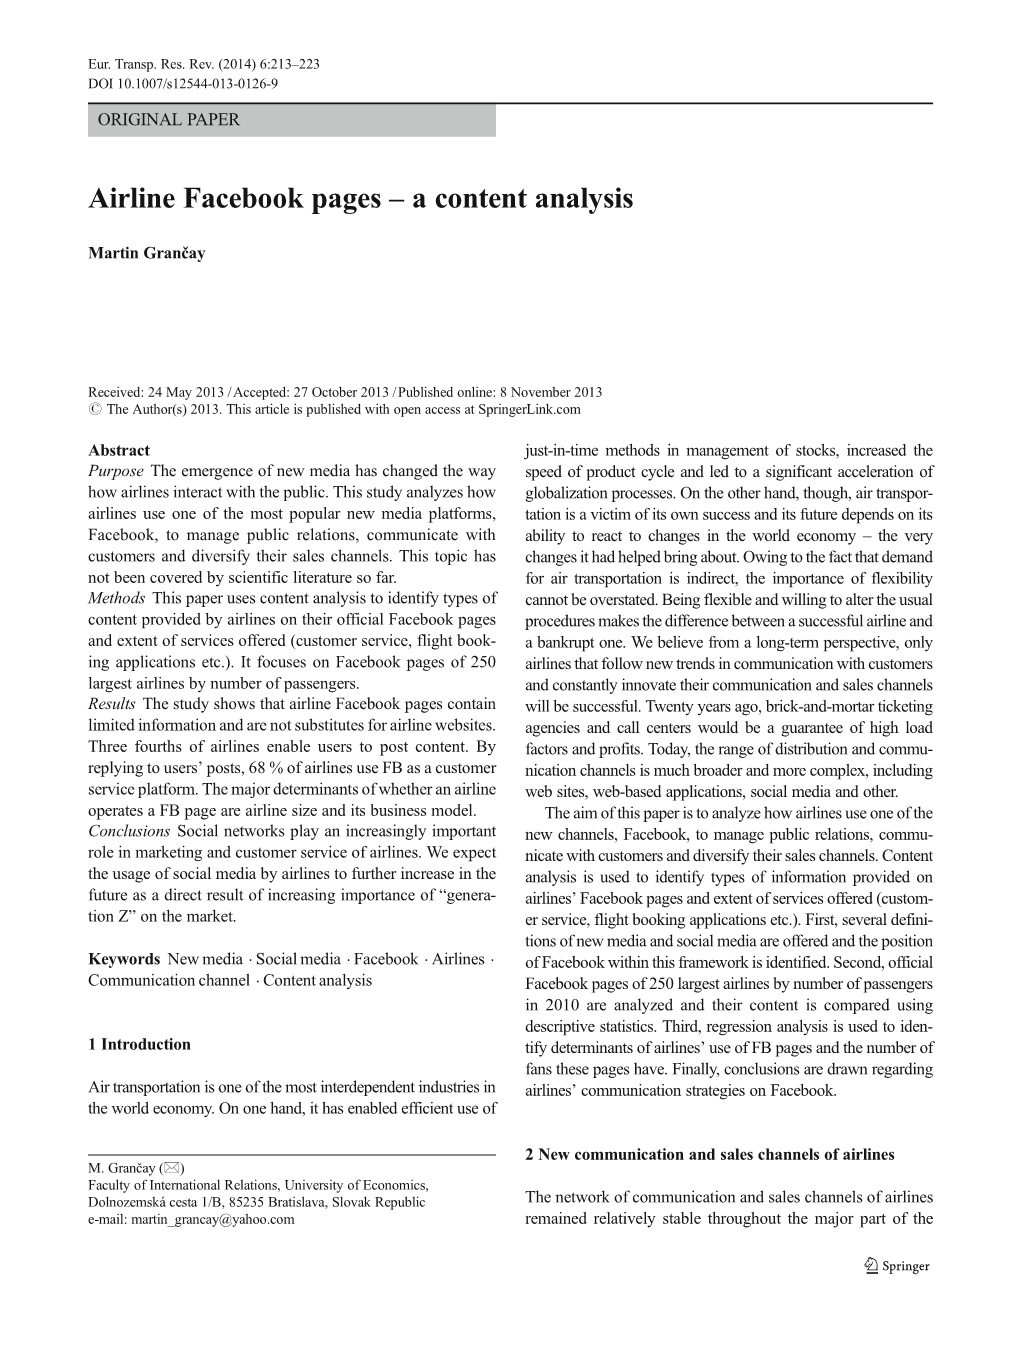 Airline Facebook Pages – a Content Analysis